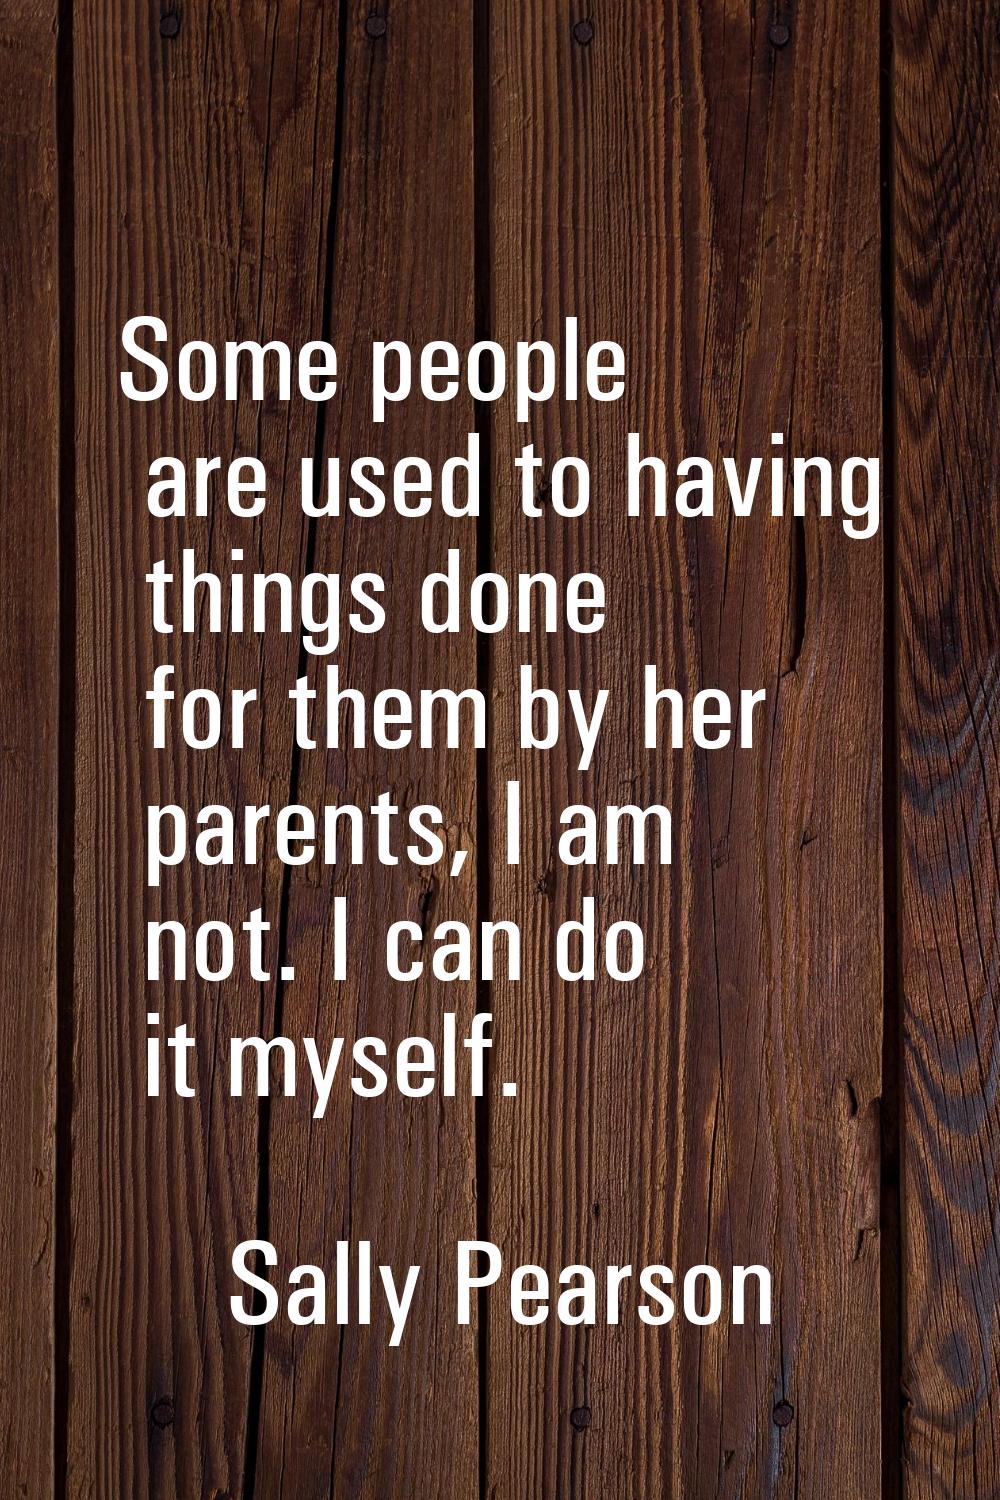 Some people are used to having things done for them by her parents, I am not. I can do it myself.